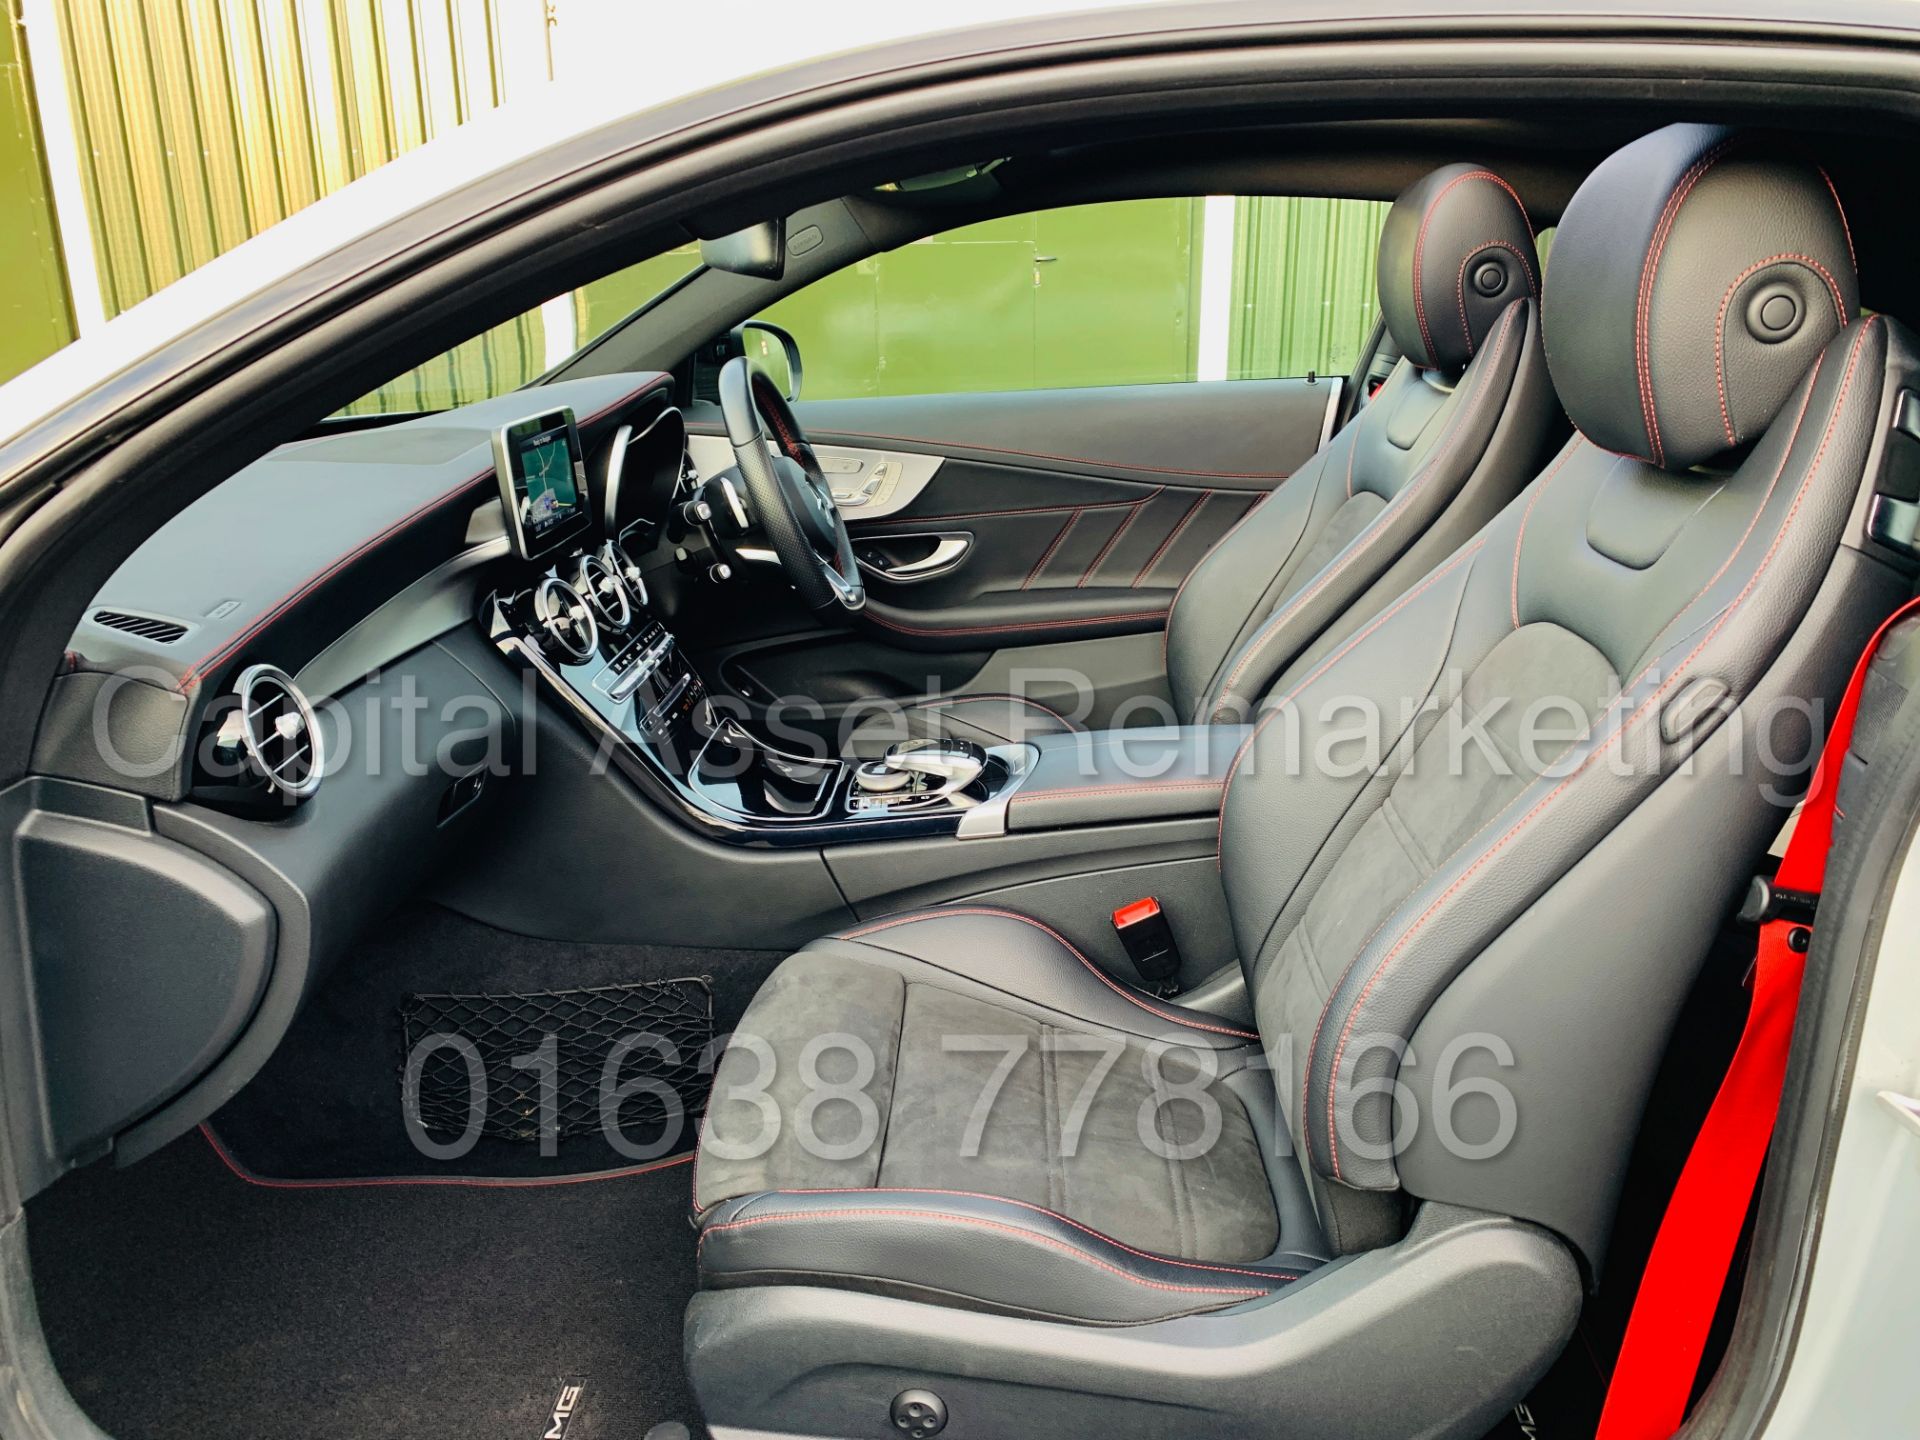 MERCEDES-BENZ C43 AMG *PREMIUM 4 MATIC* COUPE (2017) '9-G AUTO - LEATHER - SAT NAV' **FULLY LOADED** - Image 35 of 67